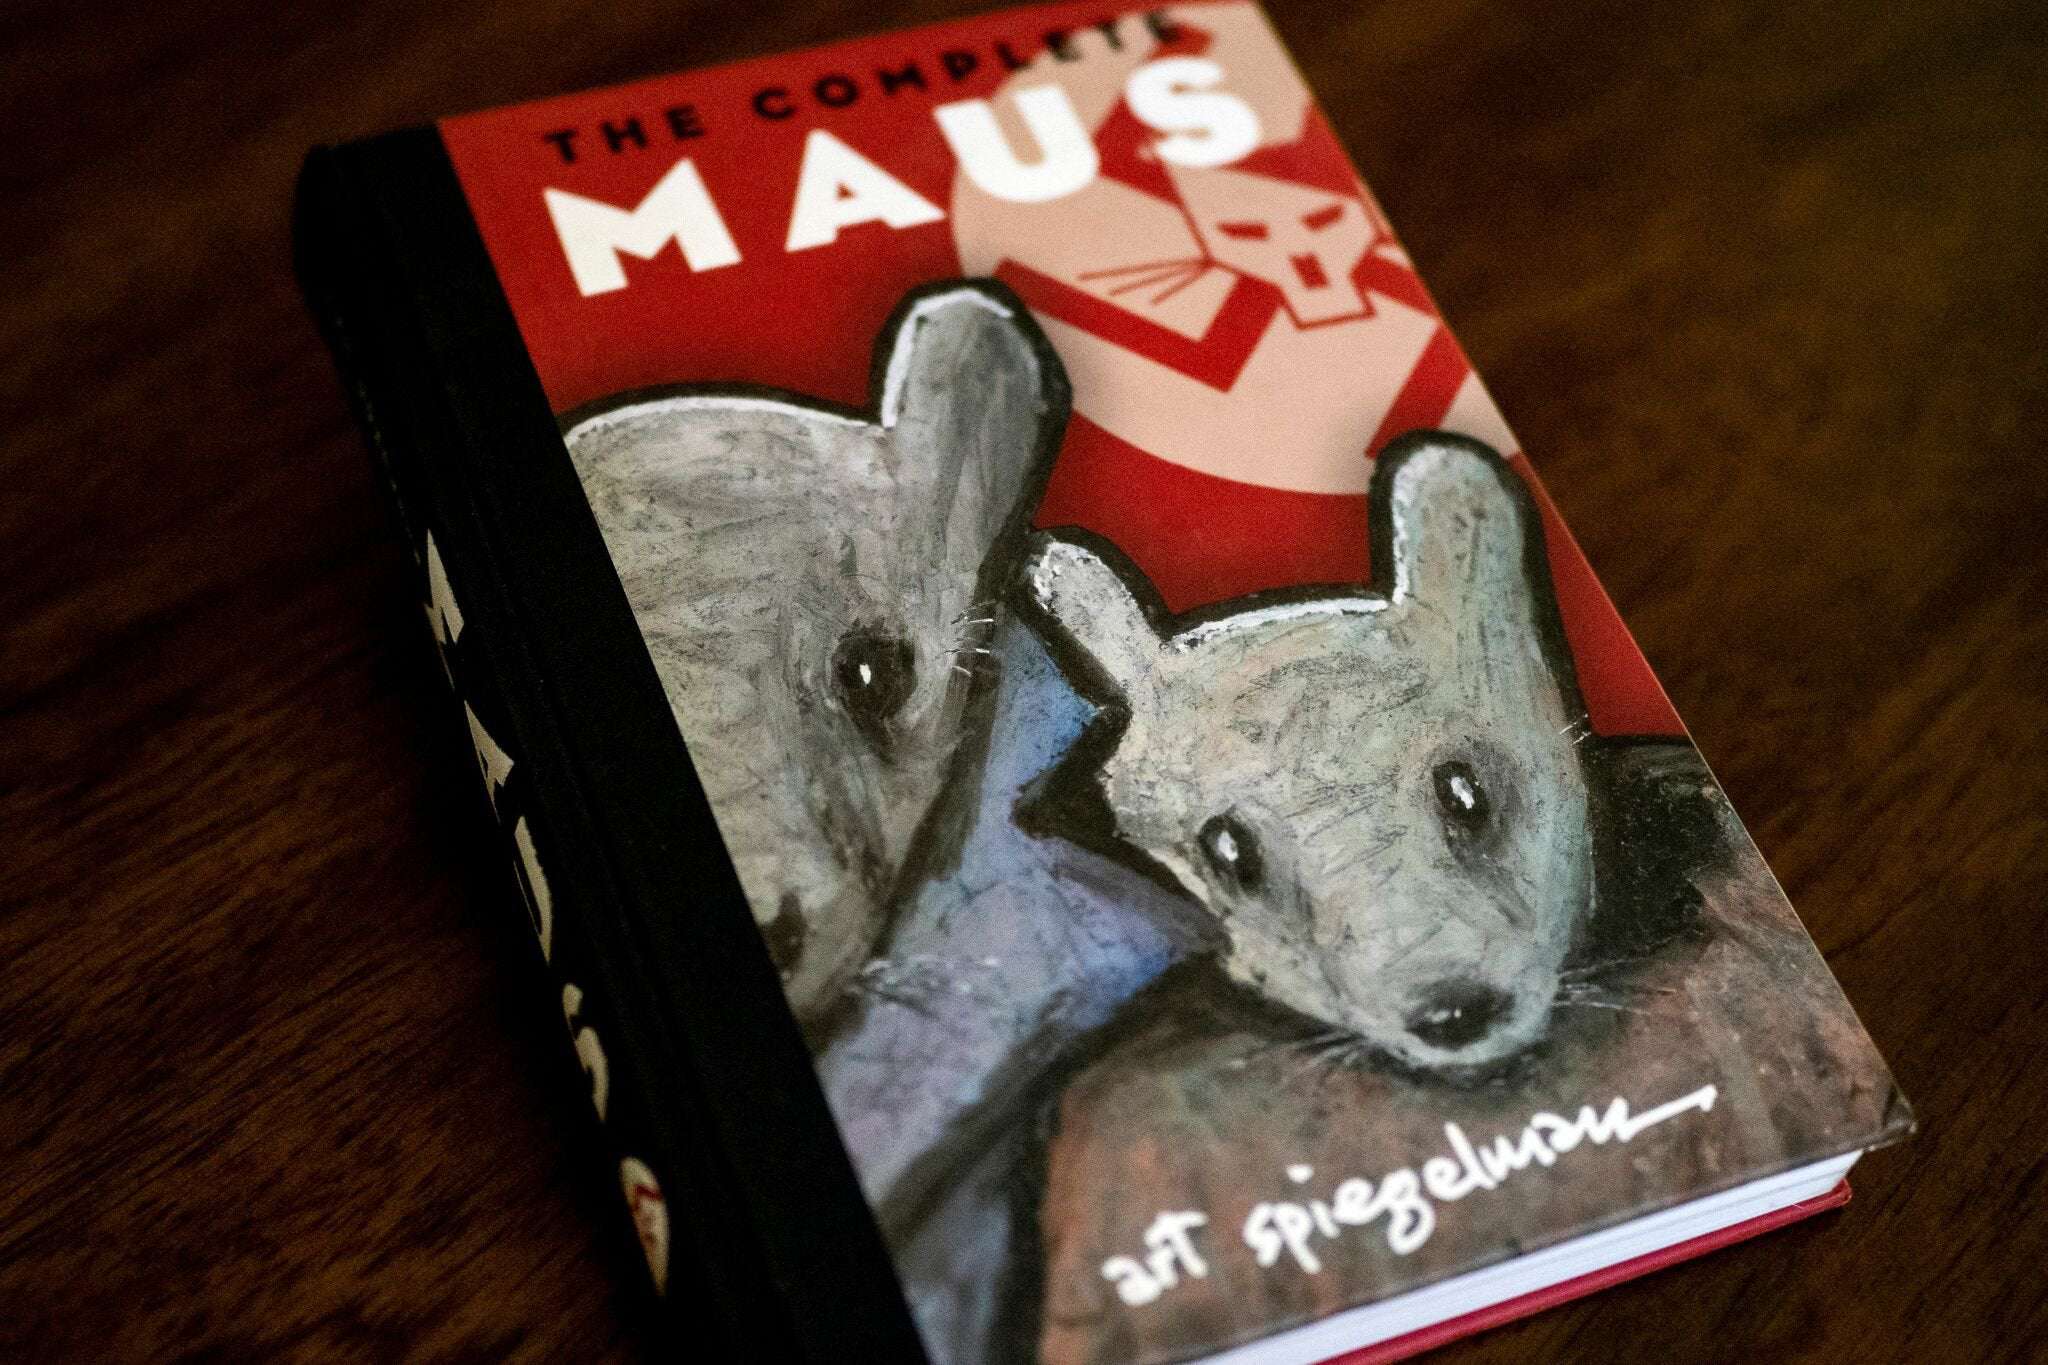 image for Bay Area comic shop donates copies of banned Holocaust graphic novel "Maus"